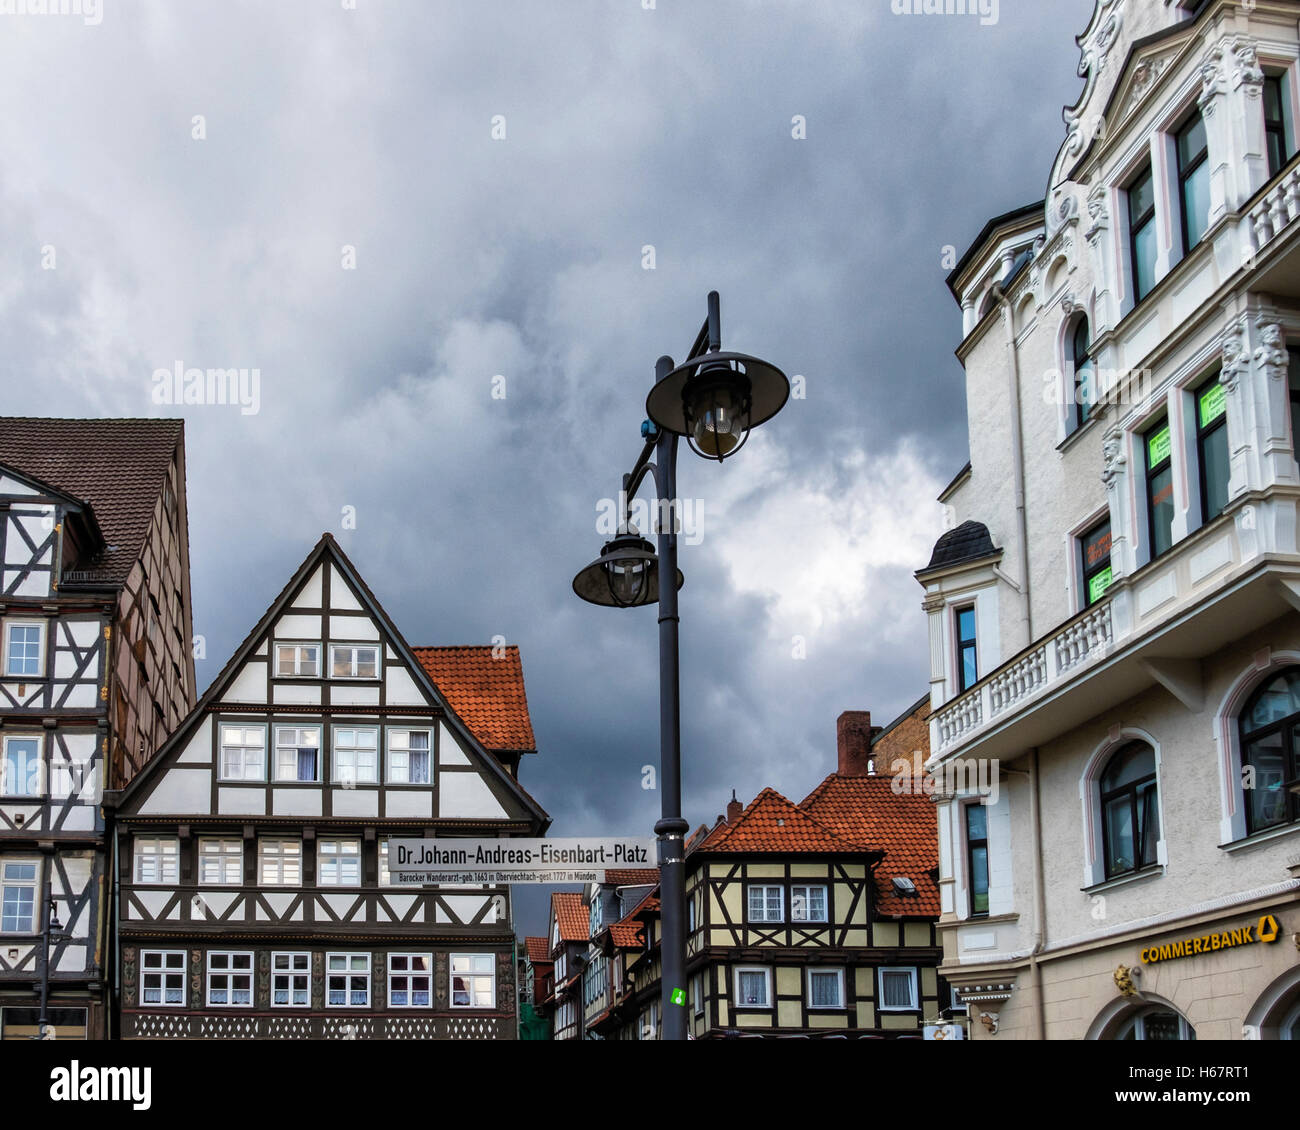 Dr-Johann-Andreas-Eisenbart-Platz, historic square with timber frame buildings in old town of Hann. Münden, Lower Saxony,Germany Stock Photo